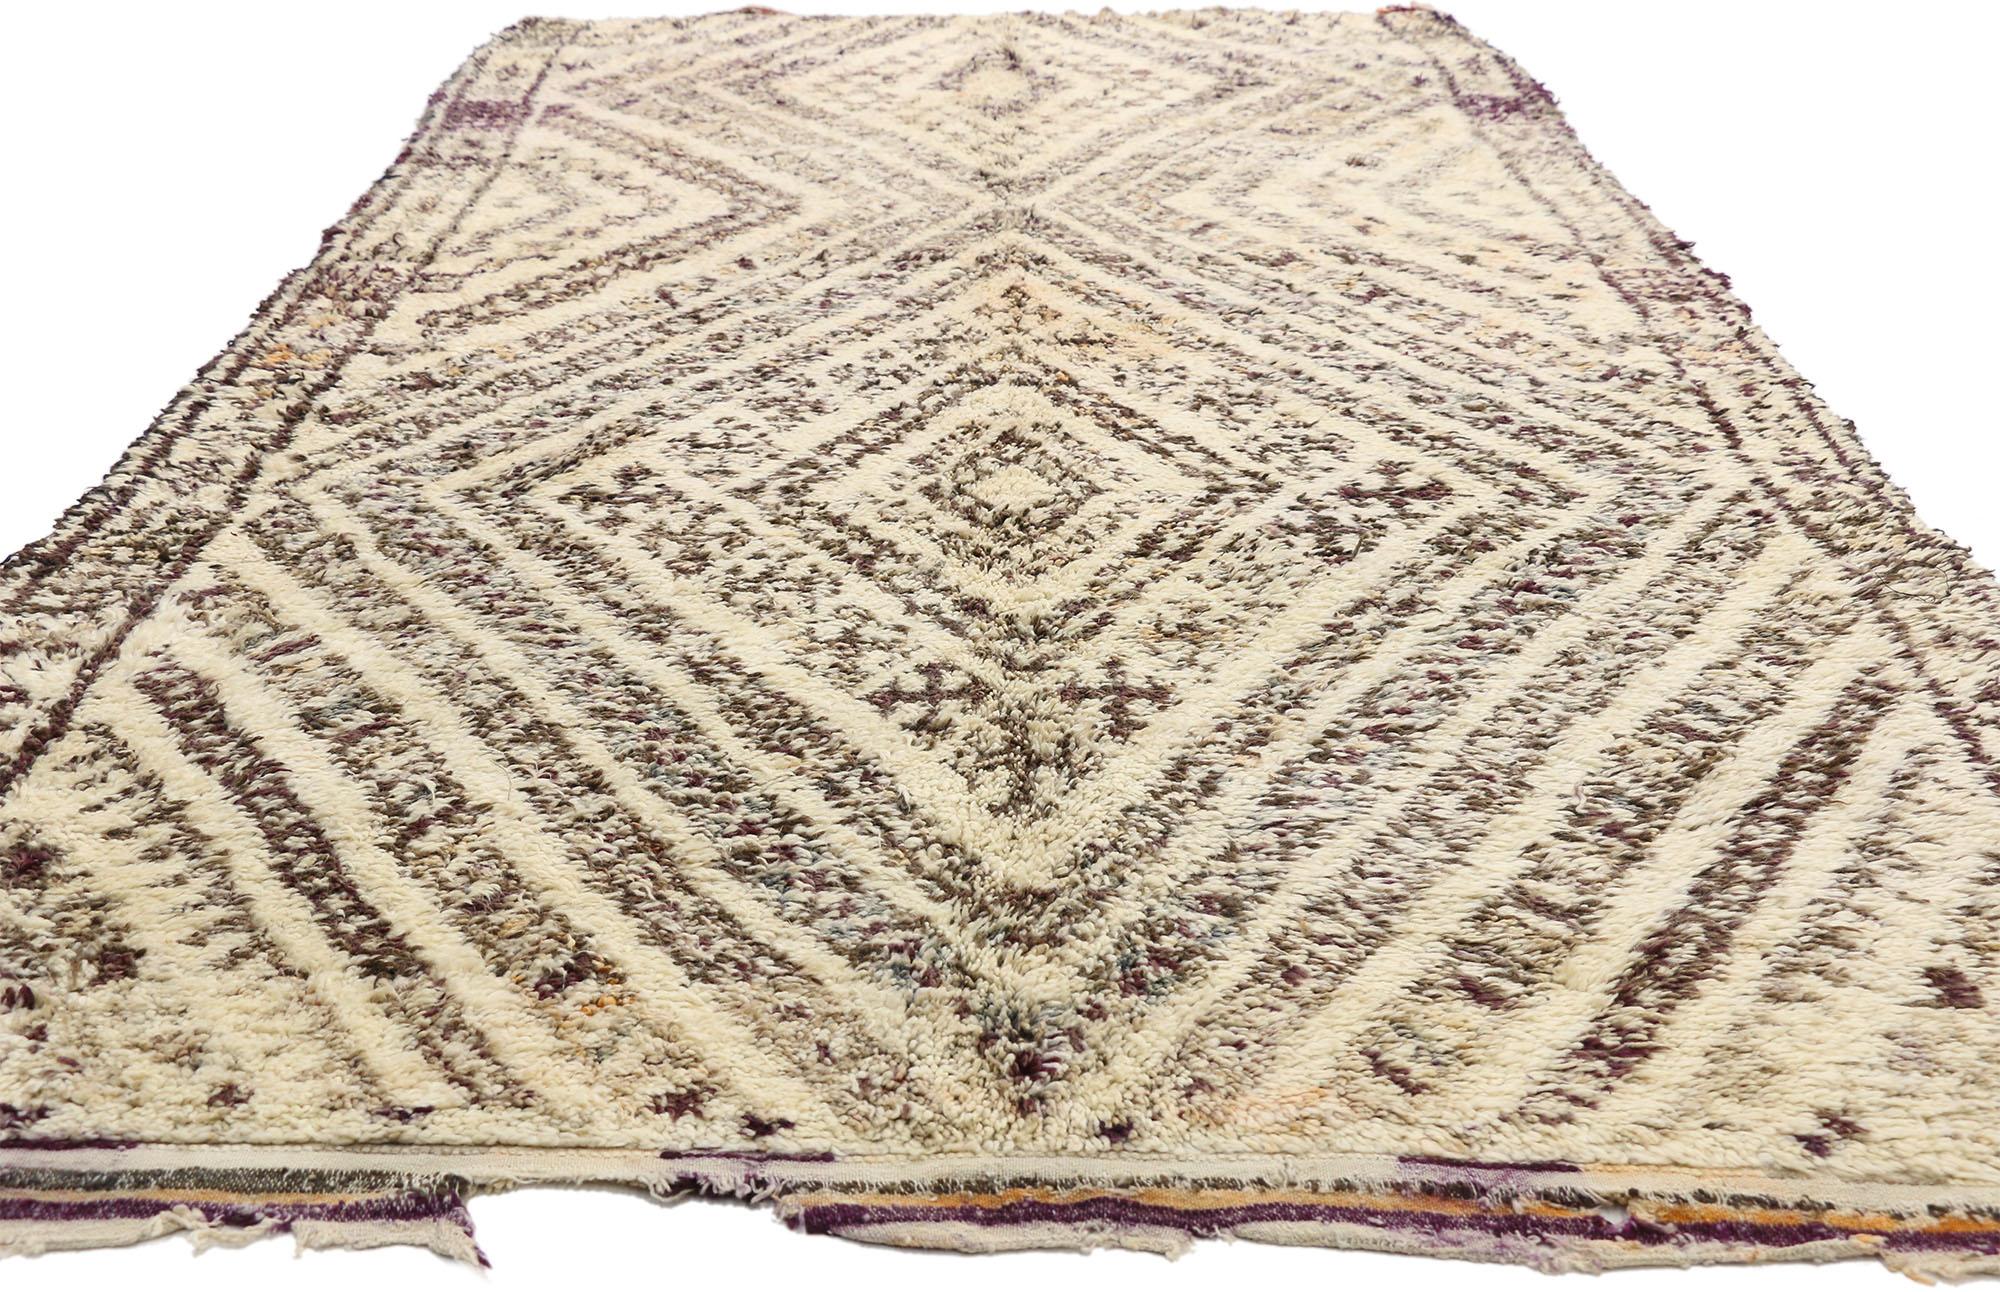 Hand-Knotted Mid-Century Modern Vintage Beni Ourain Moroccan Rug, Style, Beni Ouarain Rug